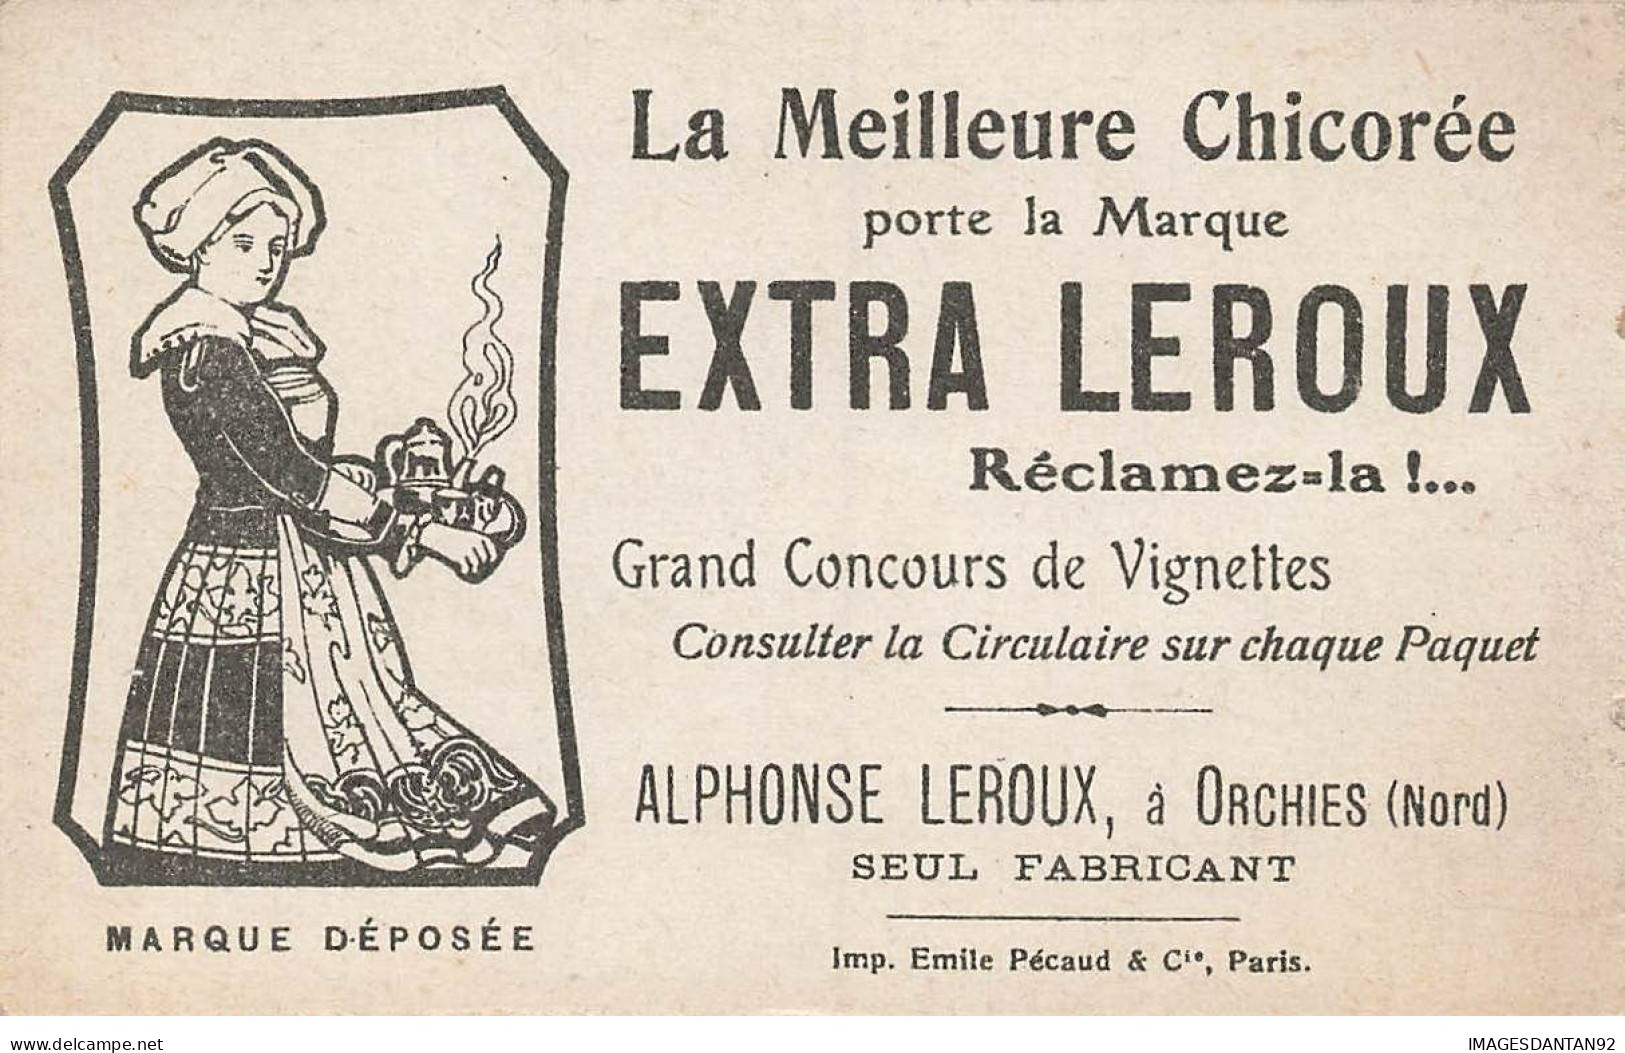 CHROMOS AG#MK1018 LE COR DE CHASSE CHICOREE ALPHONSE LEROUX A ORCHIES NORD - Tee & Kaffee